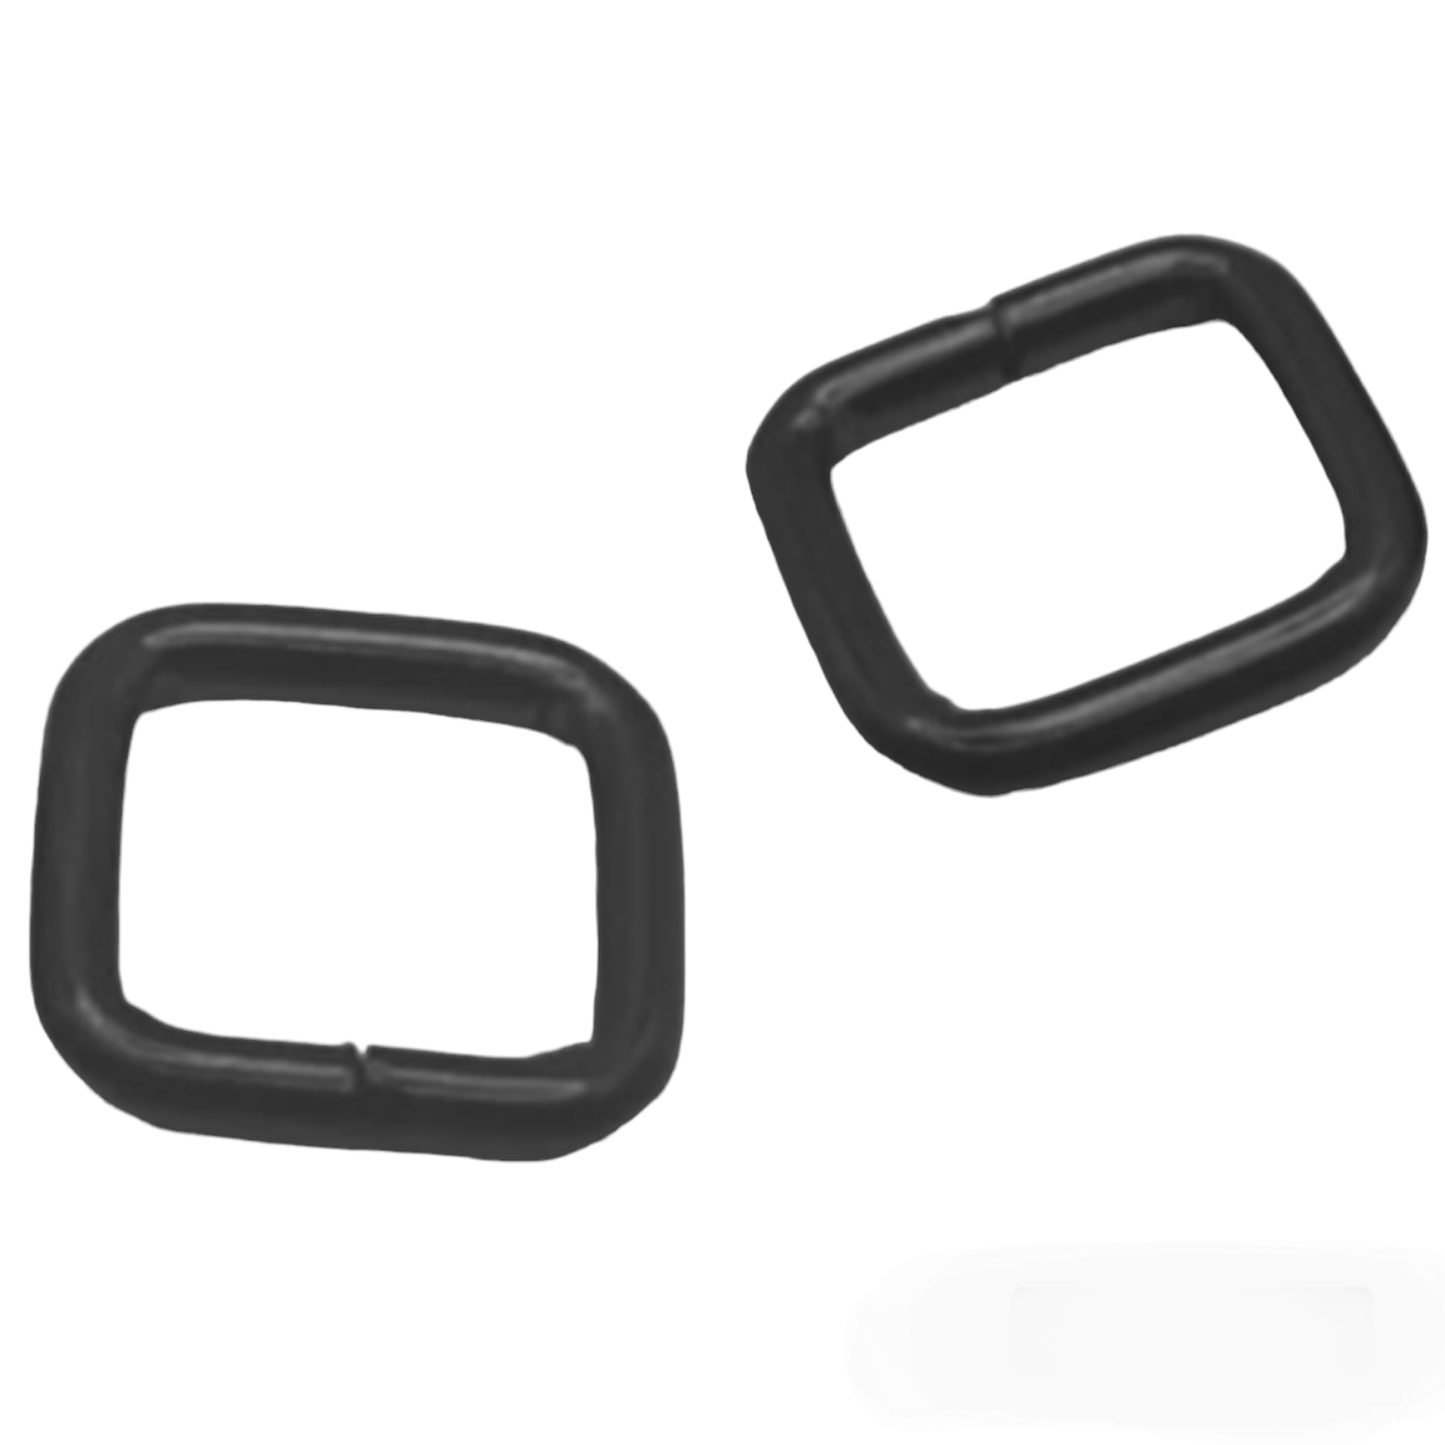 THICC Rectangle Rings, 13mm (1/2in) wide, pack of 2 Atelier Fiber Arts